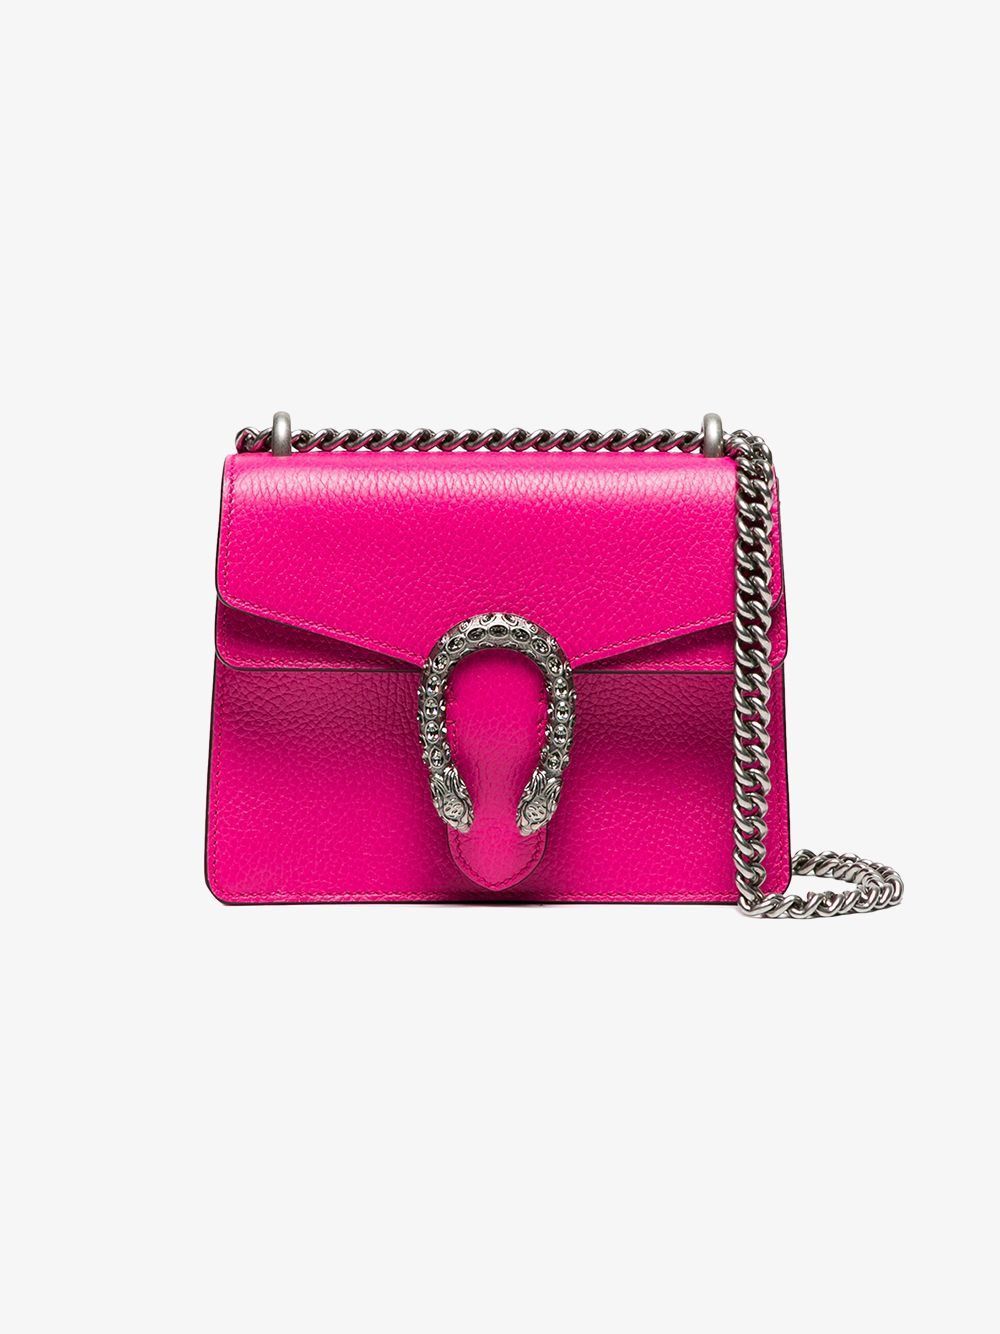 Gucci pink Dionysus small leather shoulder bag | Browns Fashion